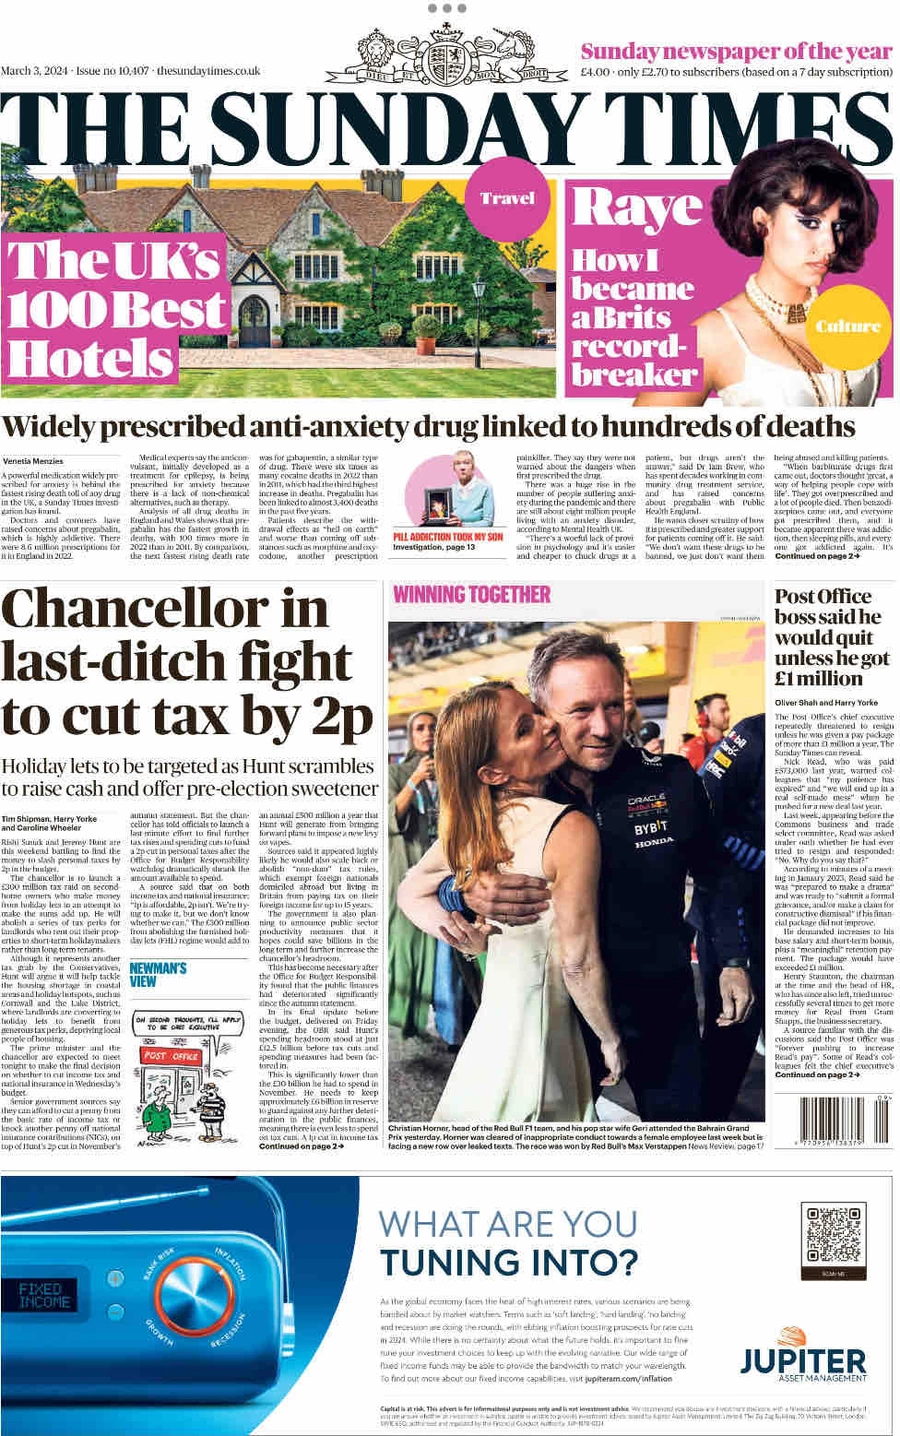 The Sunday Times - Chancellor in last-ditch fight to cut tax by 2p  